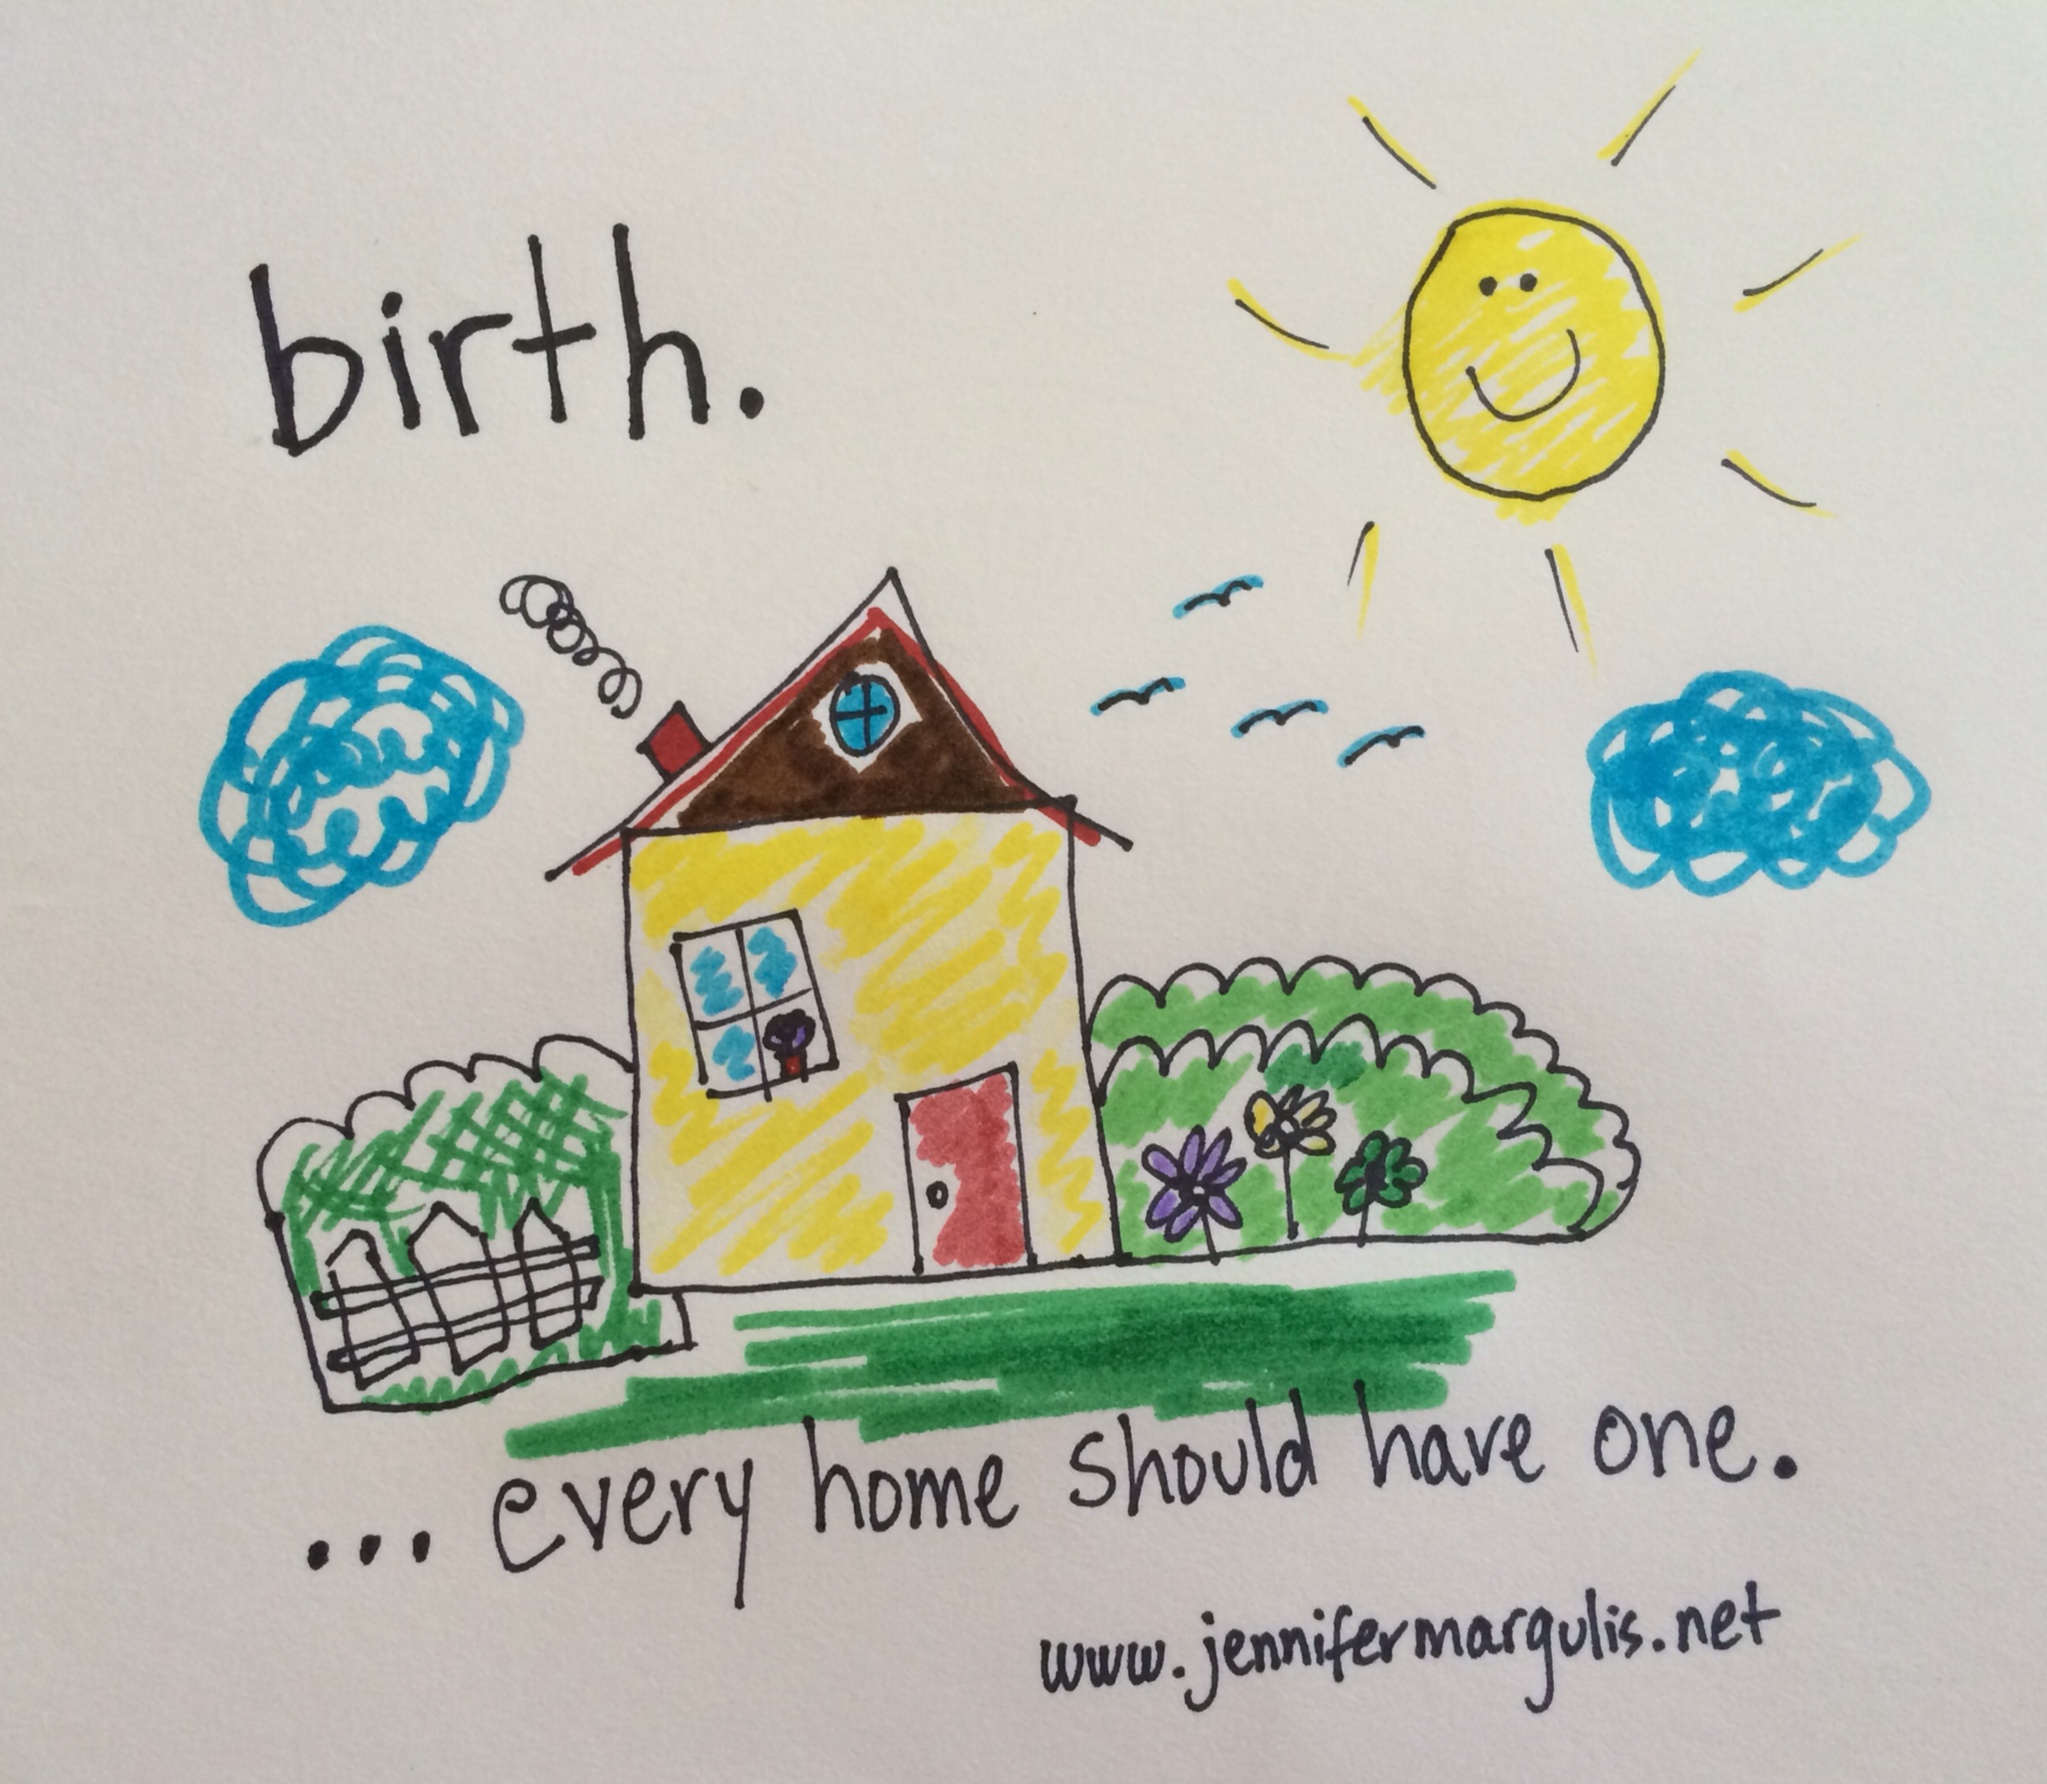 45 reasons NOT to have a home birth (spoiler: this post is not what you think)